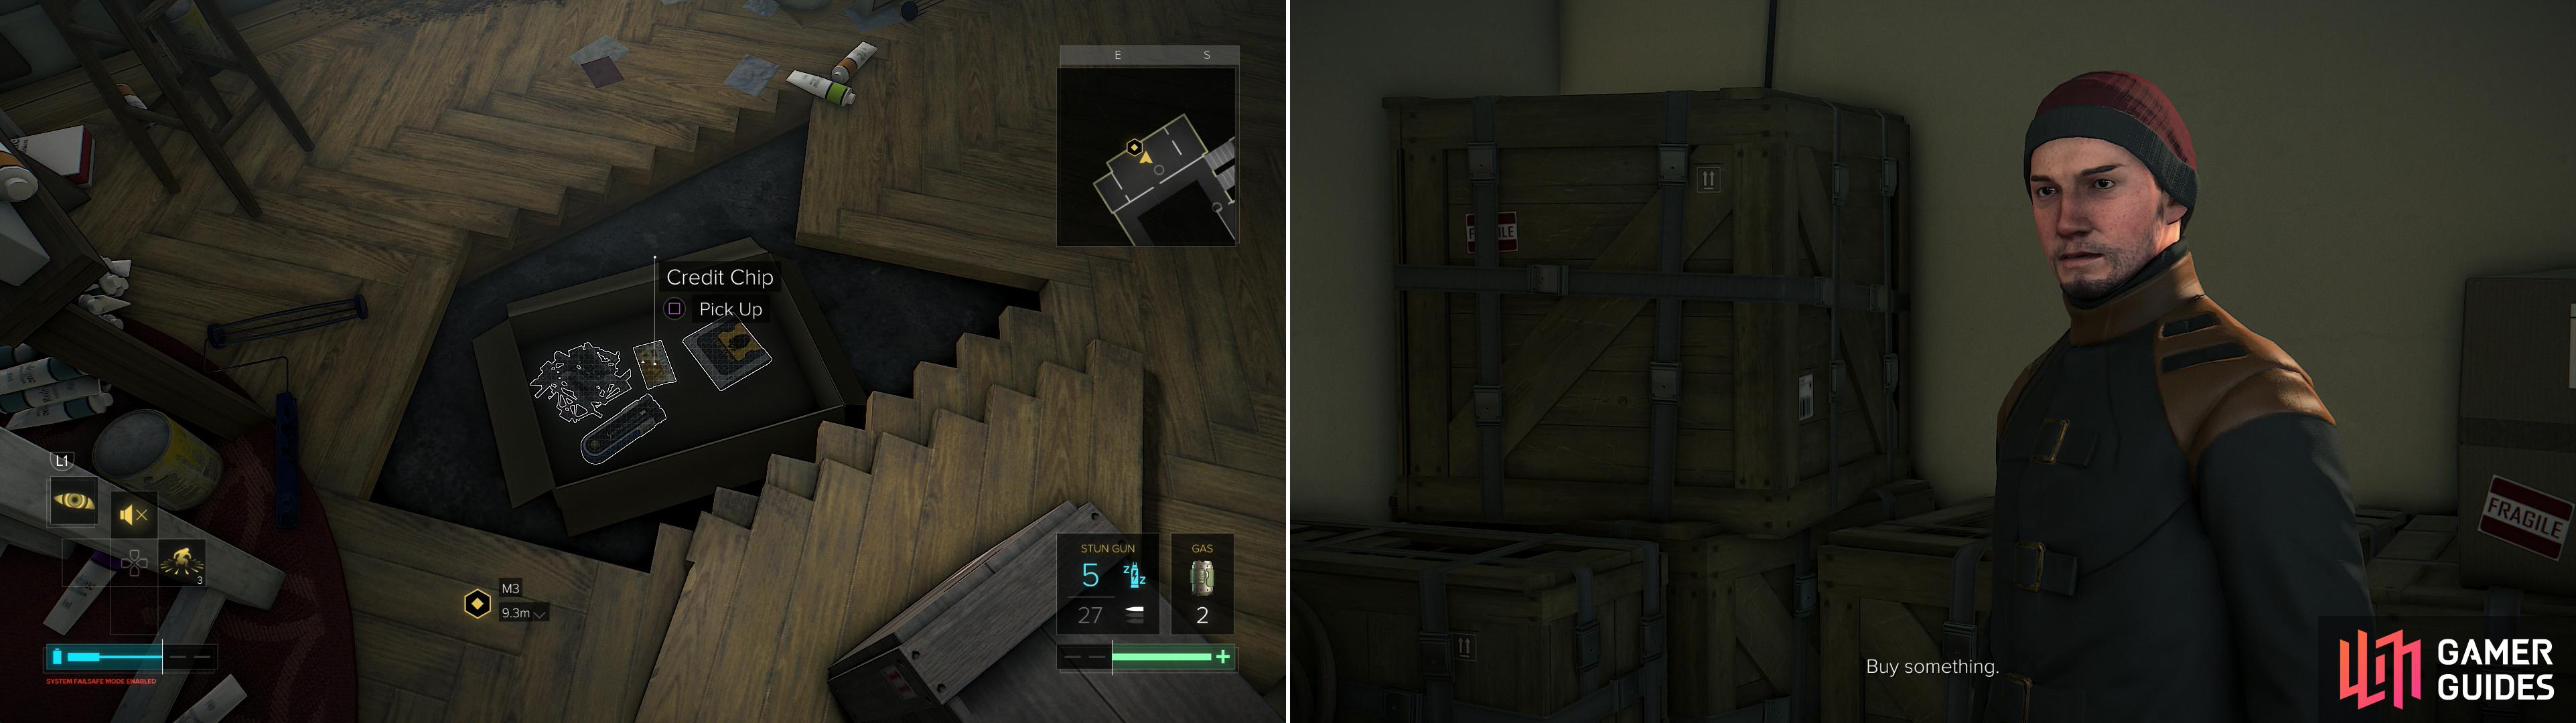 In apartment #32 you can find a hidden stash (left). Tars dwells in apartment #21. He might not be too nice, but he’ll buy junk you find (right).